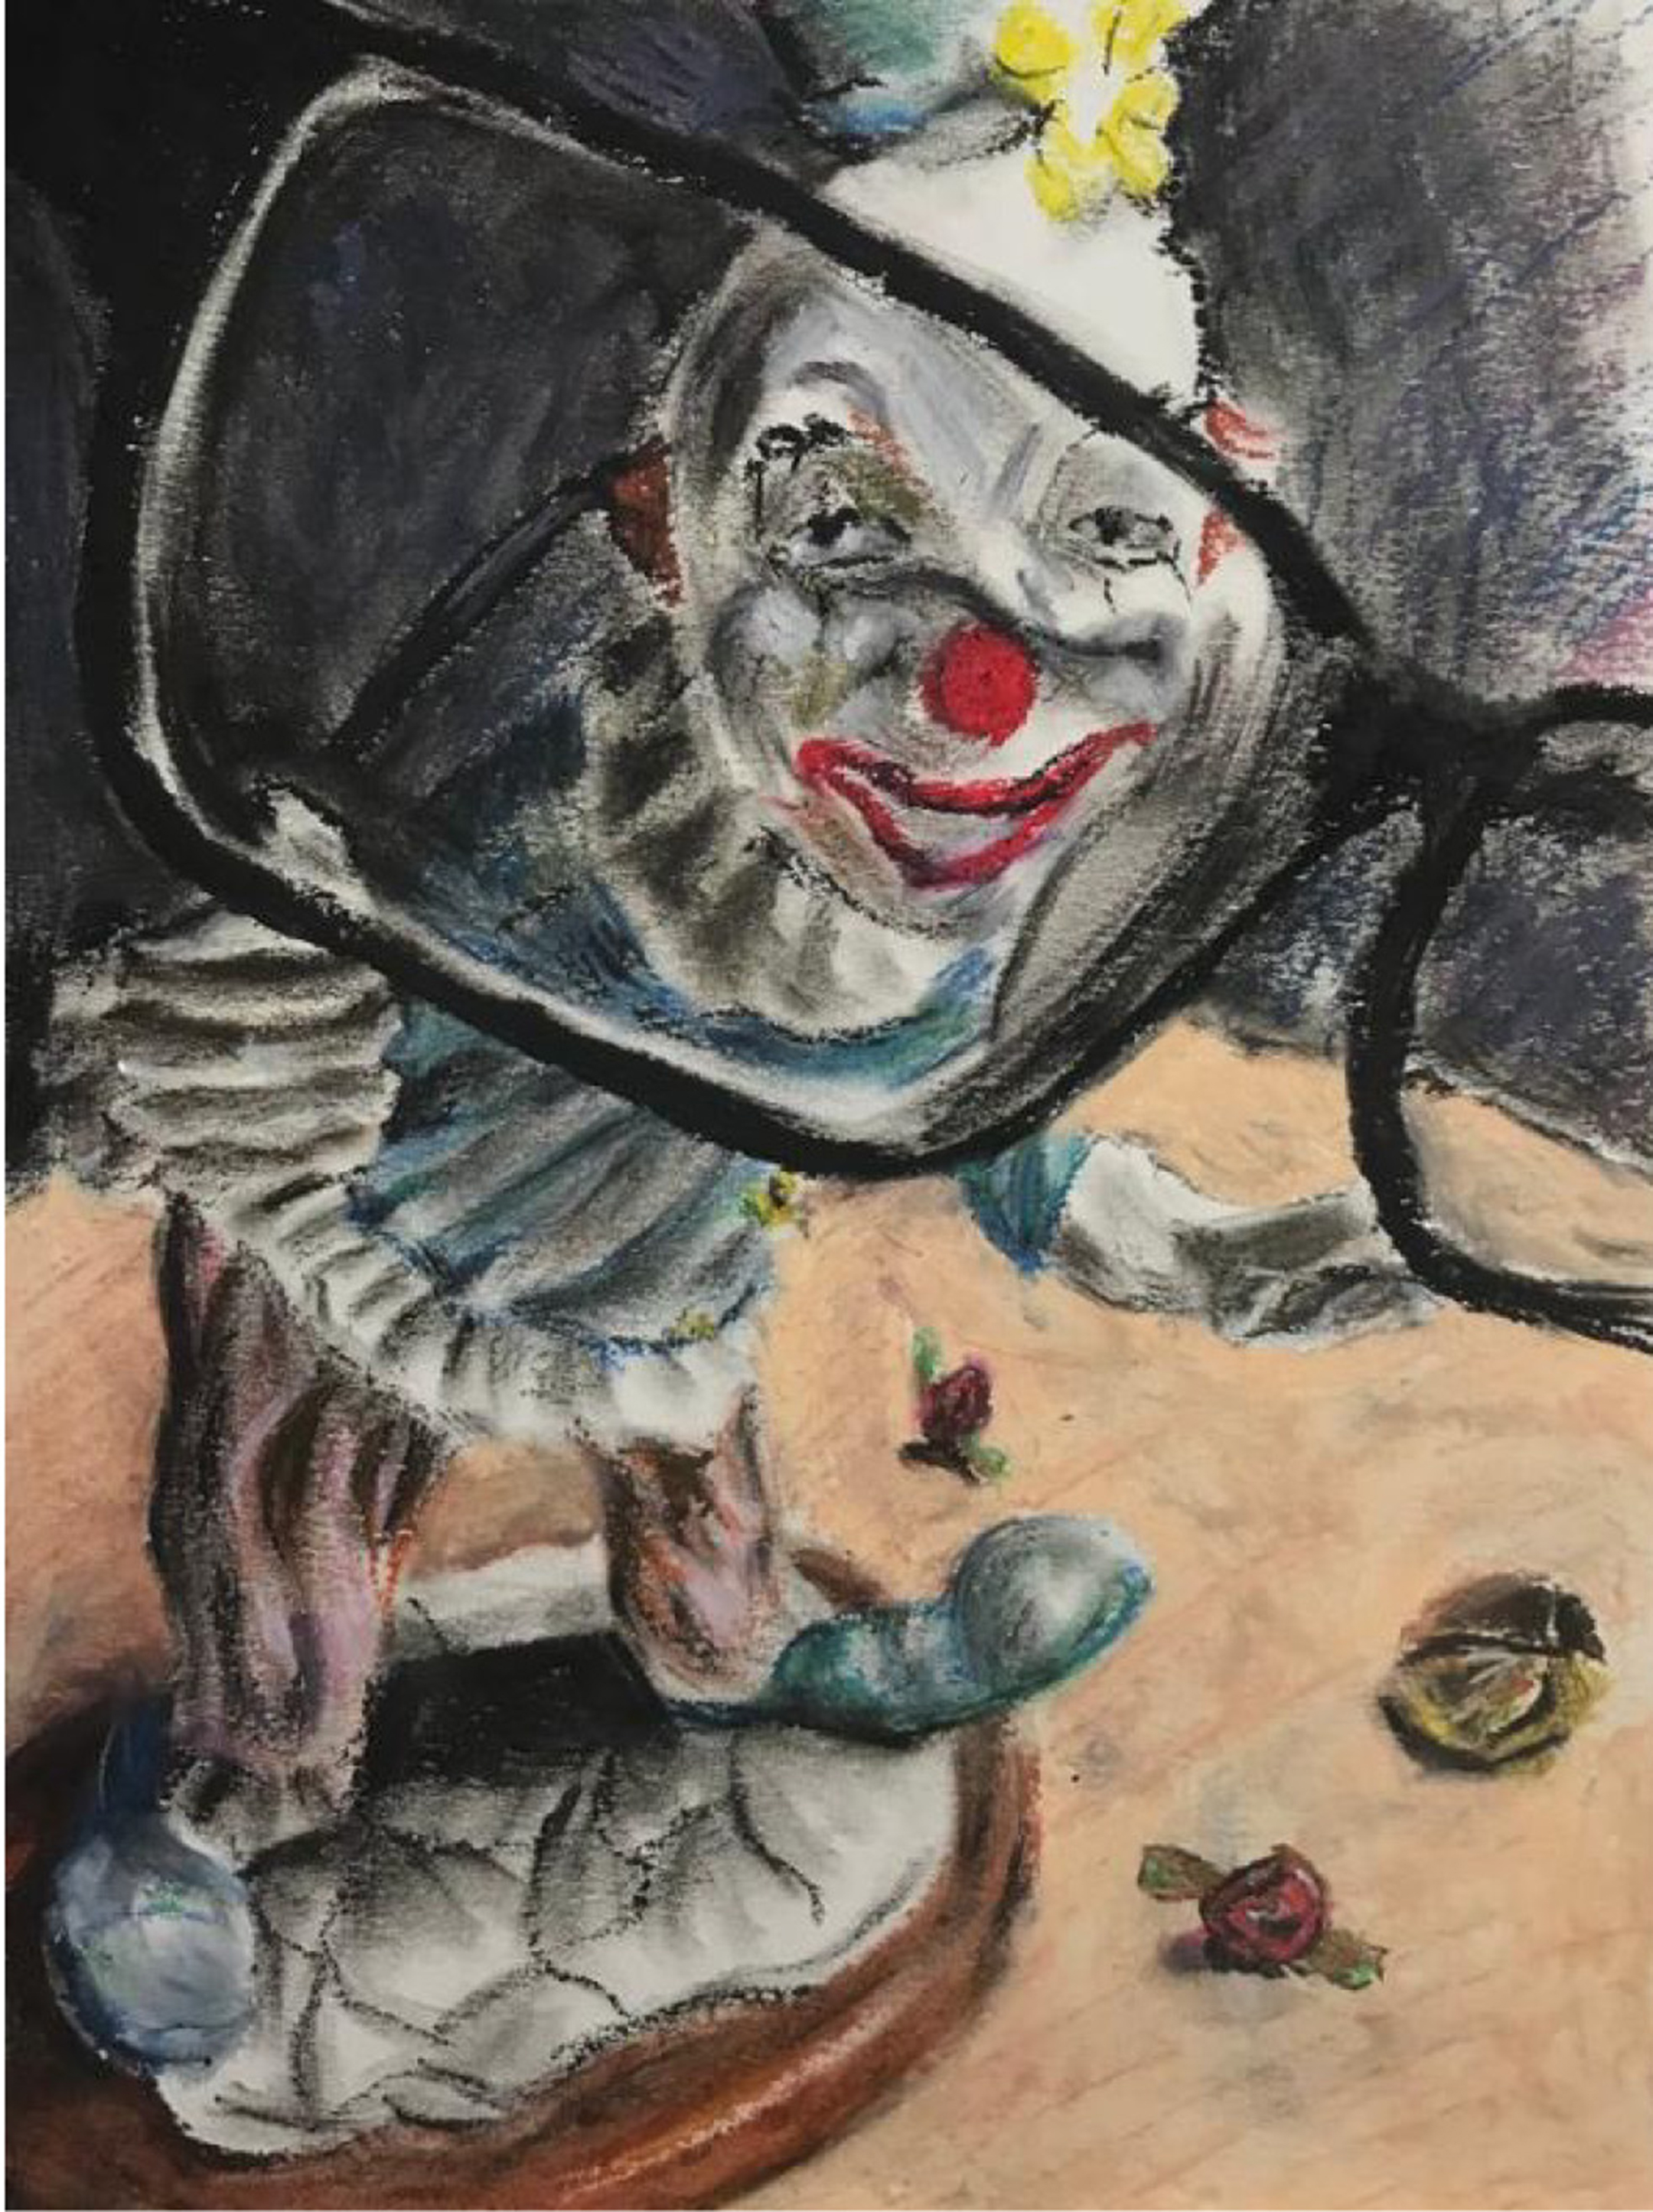 Painting of a porcelain figure of a clown seen through a pair of glasses